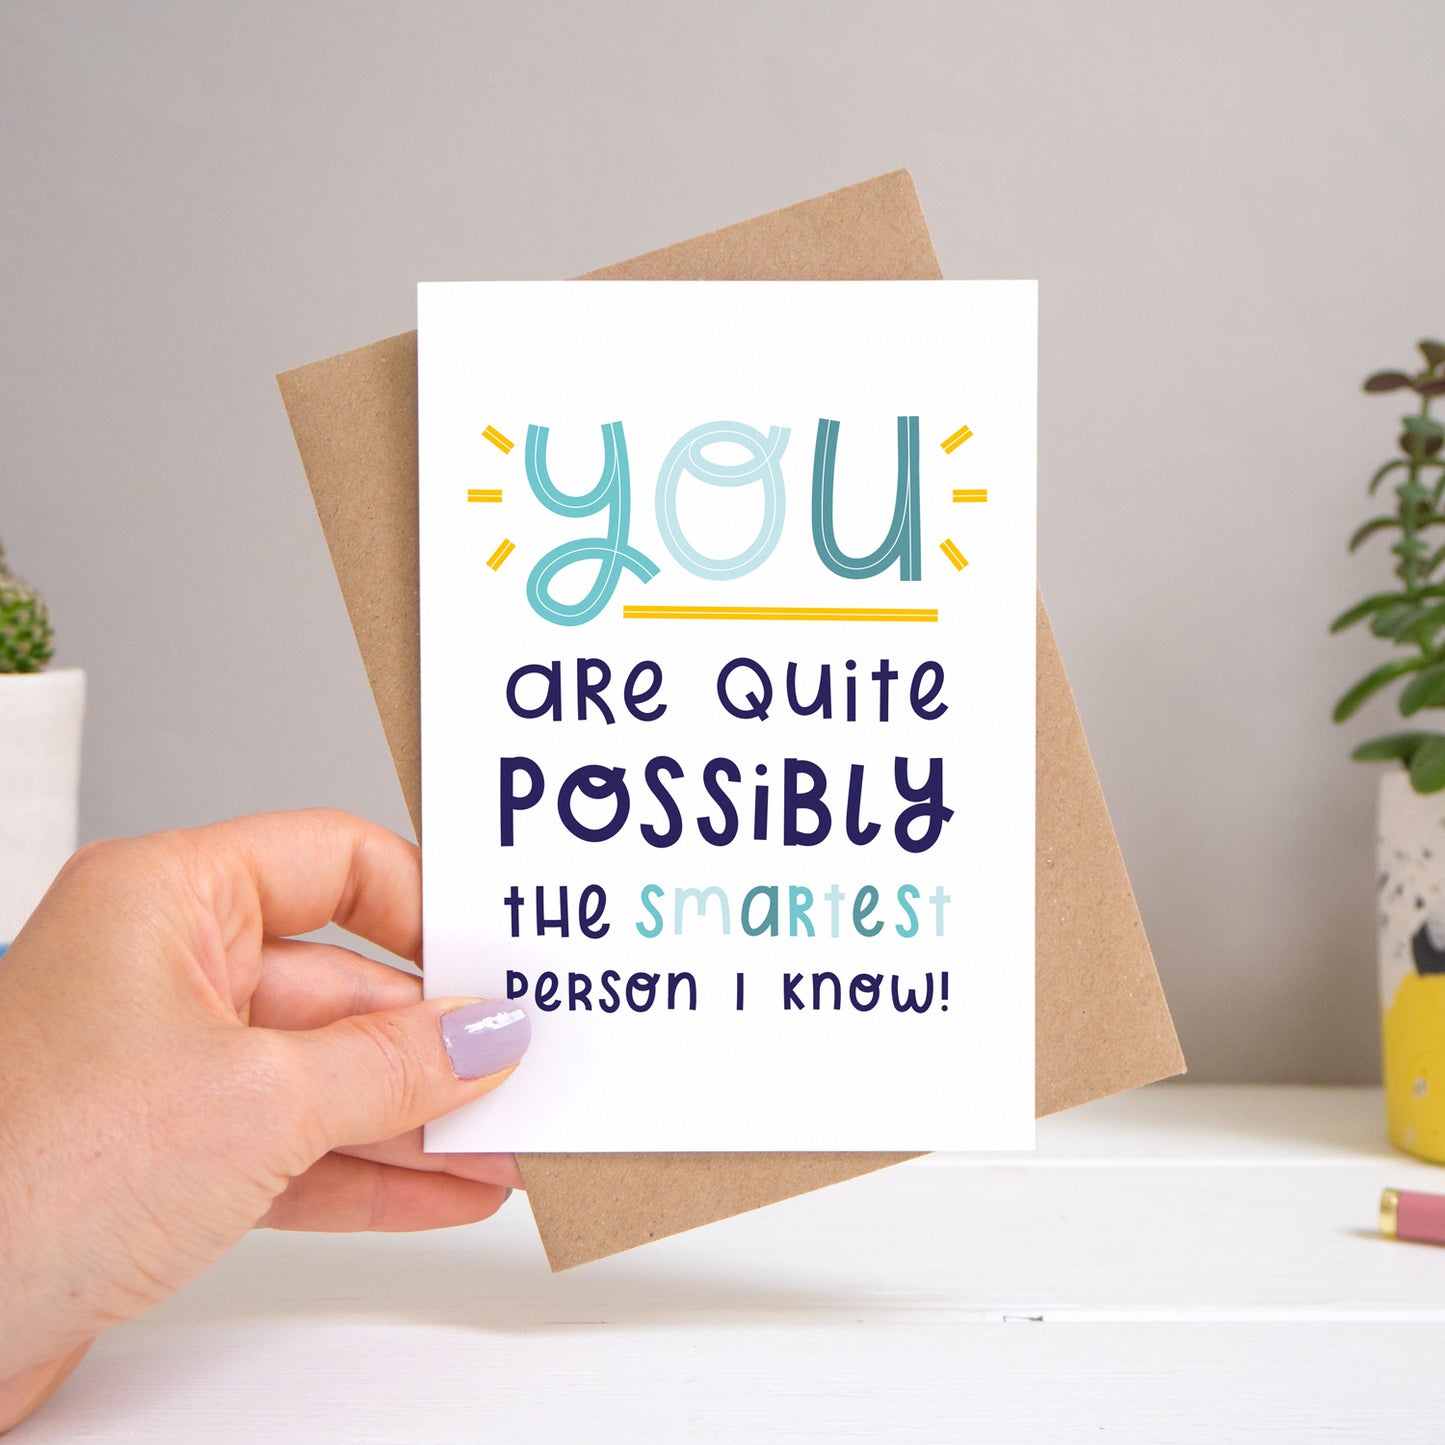 A ‘smartest person I know’ card held over a warm grey and white background with potted plants peeping the sides. Behind the card is a kraft brown envelope that comes with the card. The text on this version of the card is in varying tones of navy and blue.